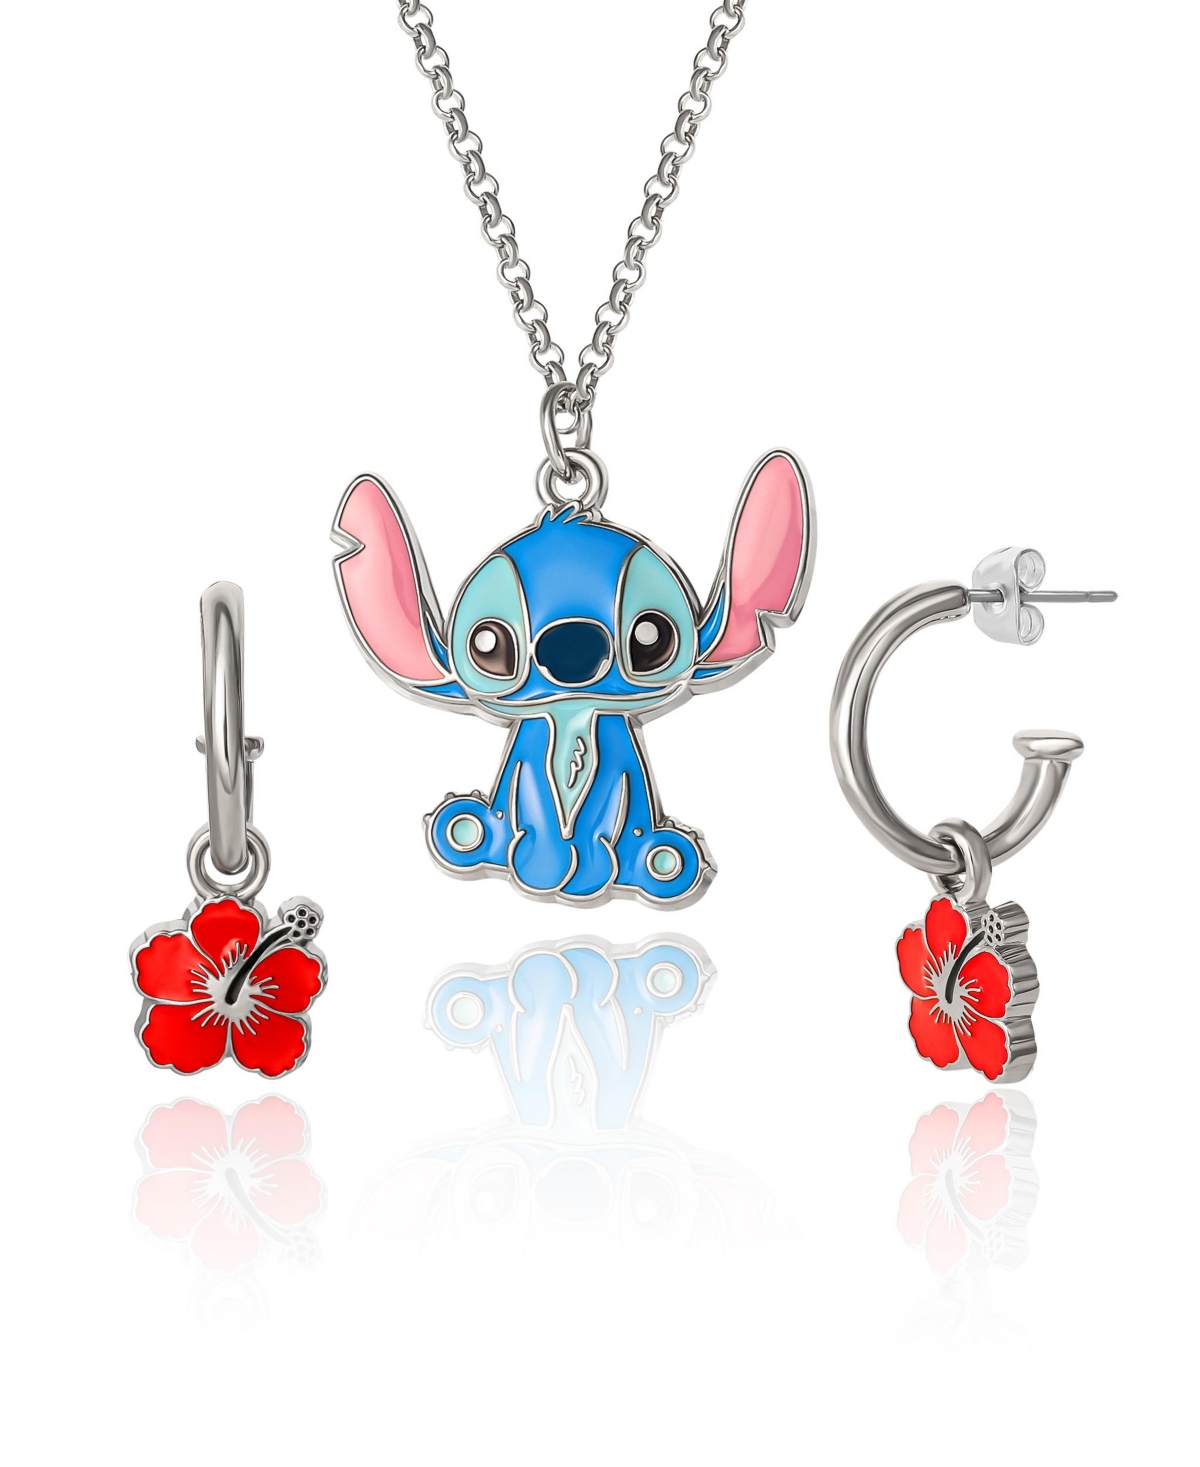 Lilo and Stitch Fashion Stitch Necklace & Flower Earrings Set - Red, blue